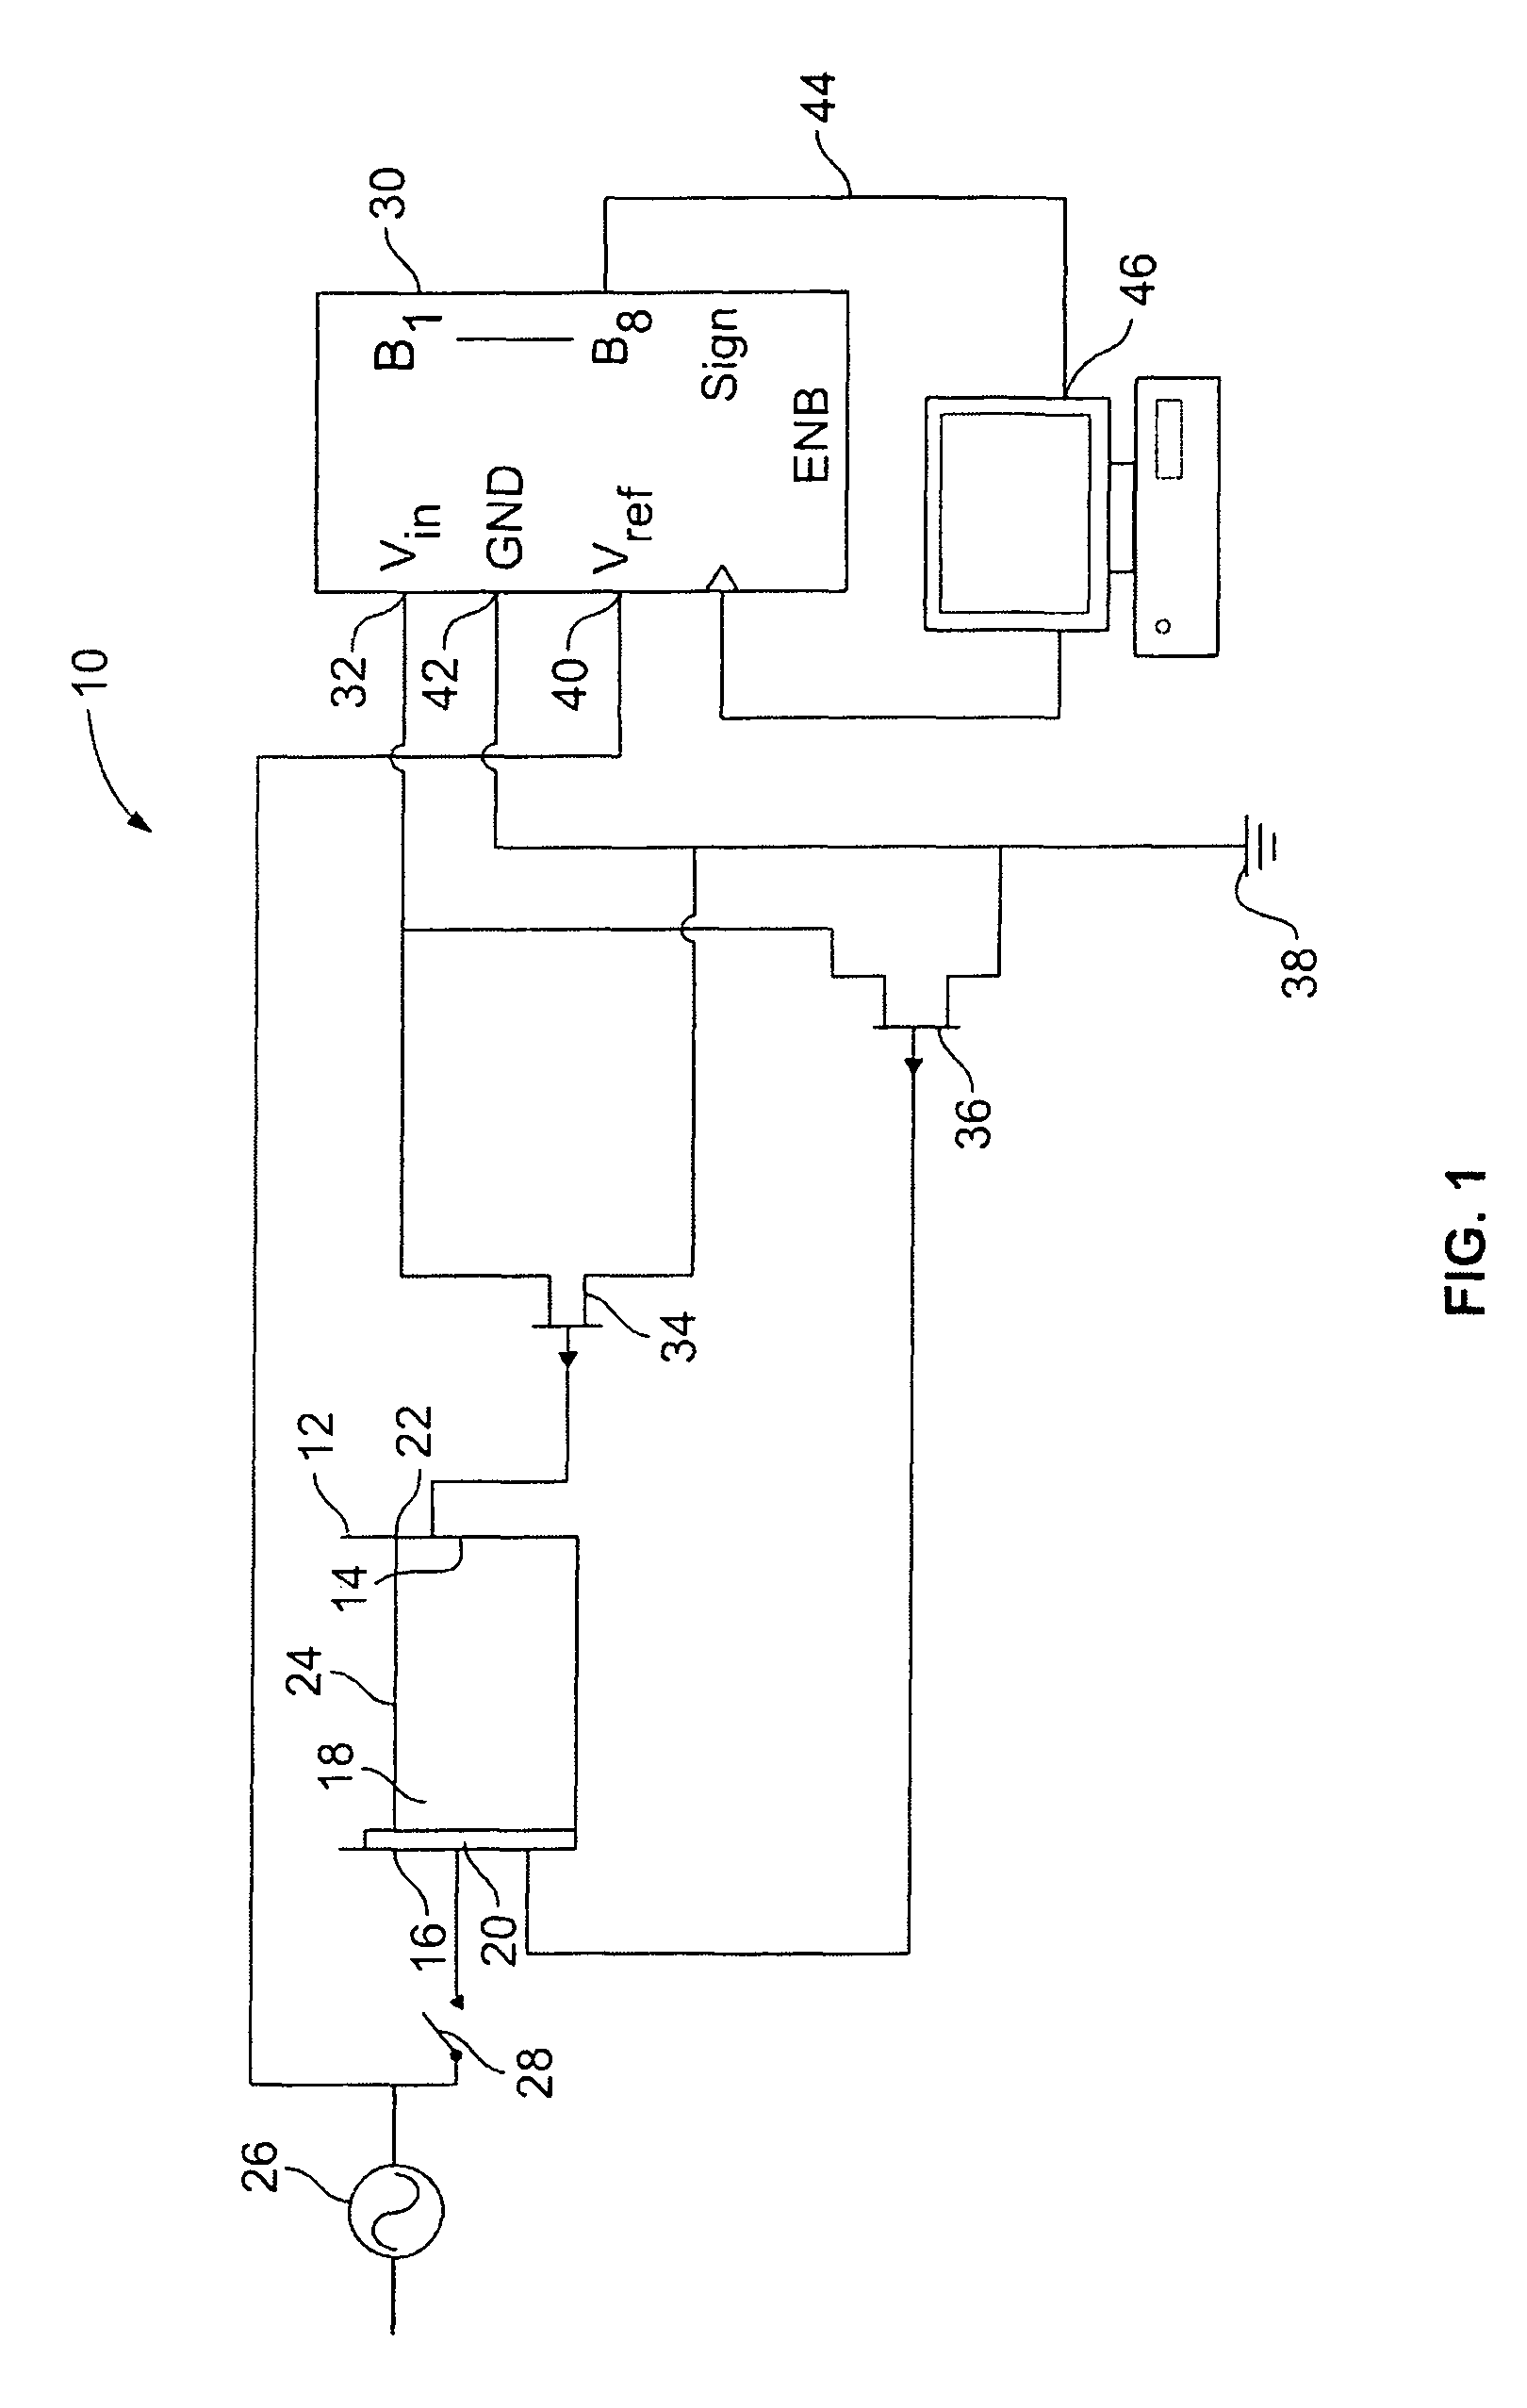 Three-dimensional impedance imaging device